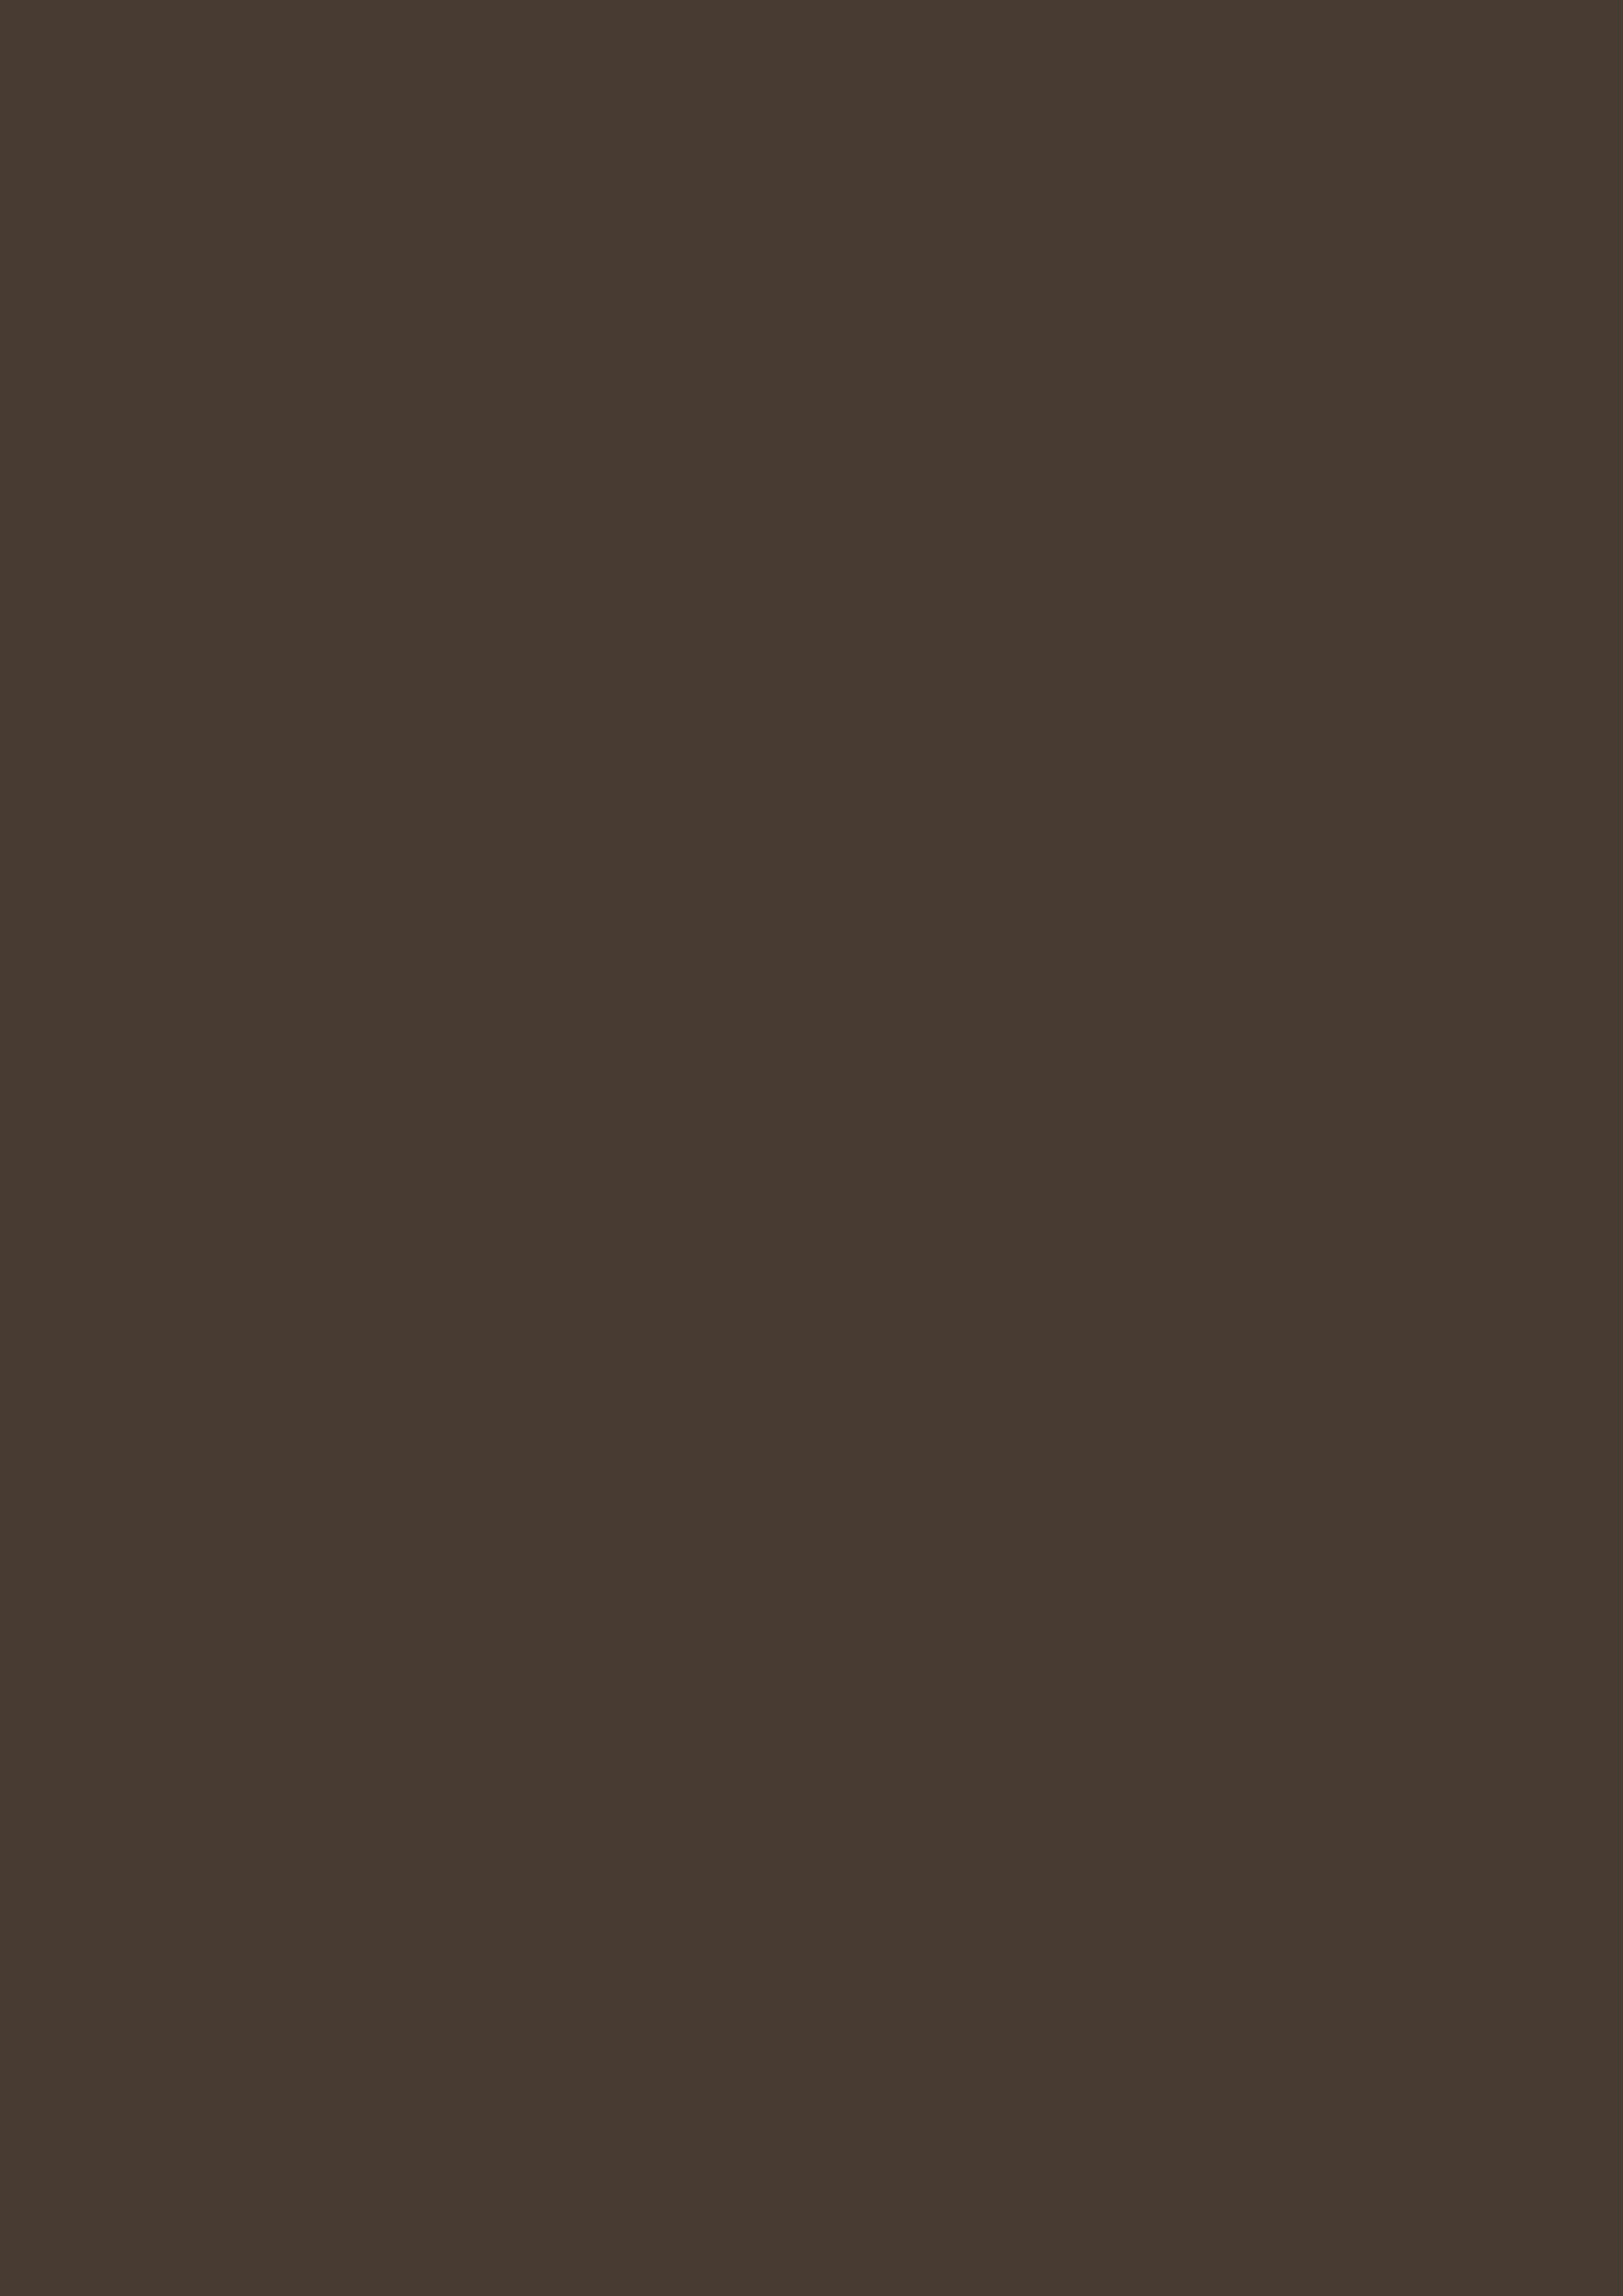 2480x3508 Dark Taupe Solid Color Background